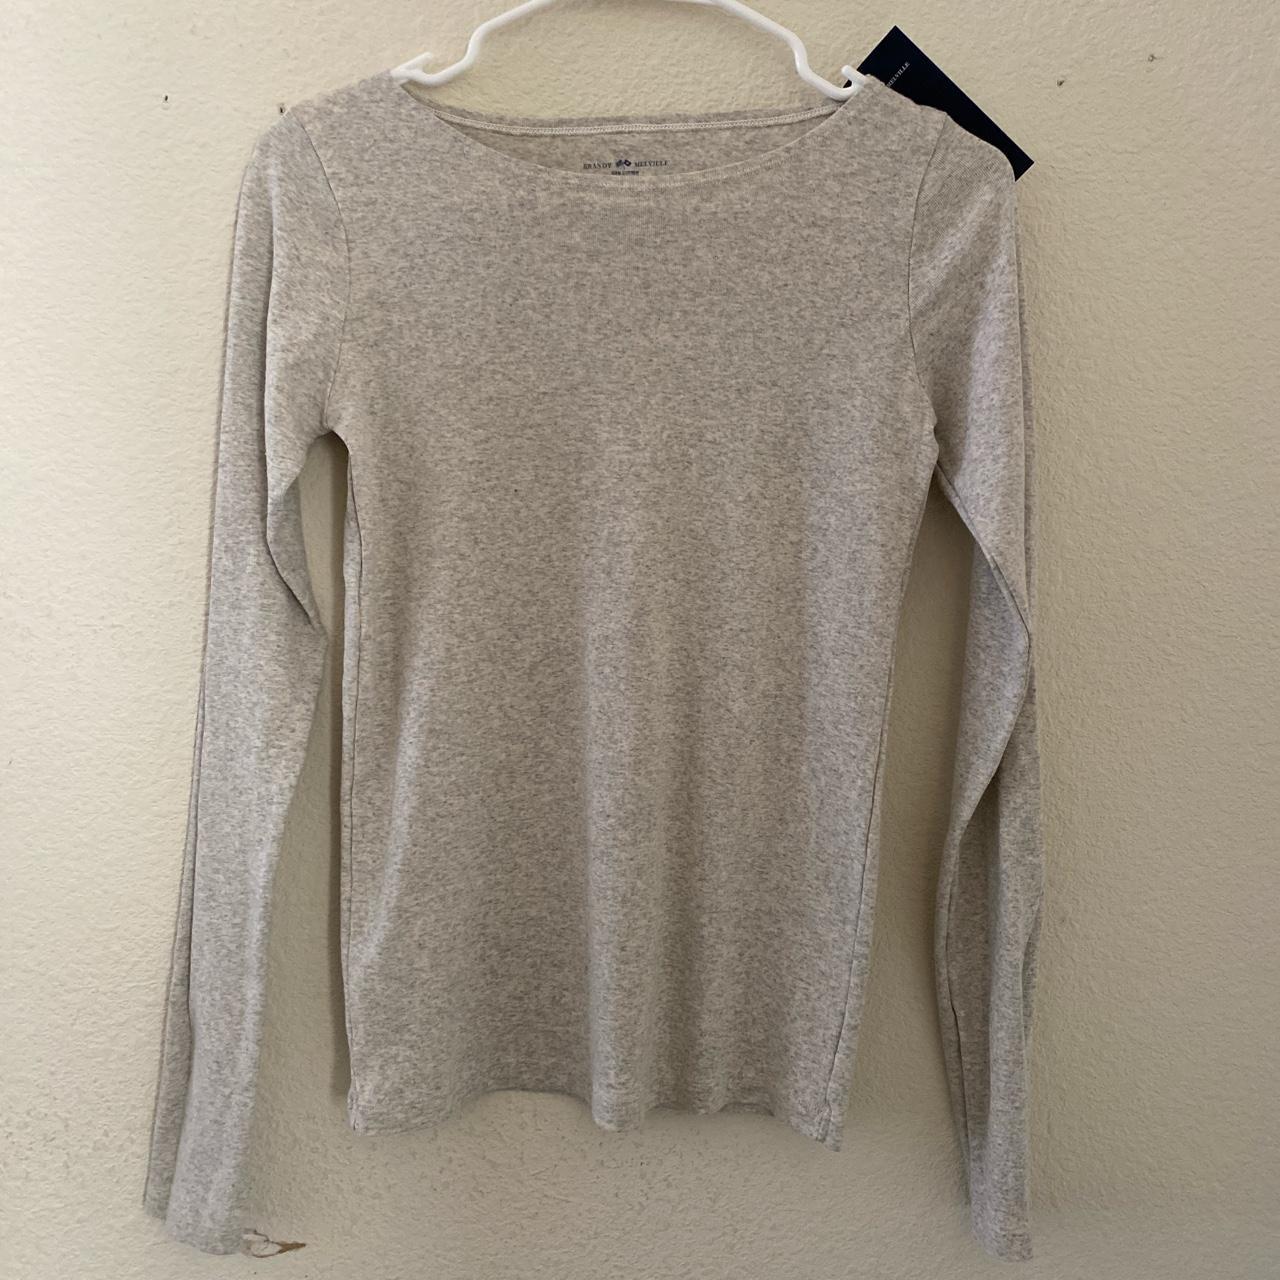 Brandy Melville Gray Ribbed Long Sleeve Crop Shirt - $15 (50% Off Retail) -  From Zarahi